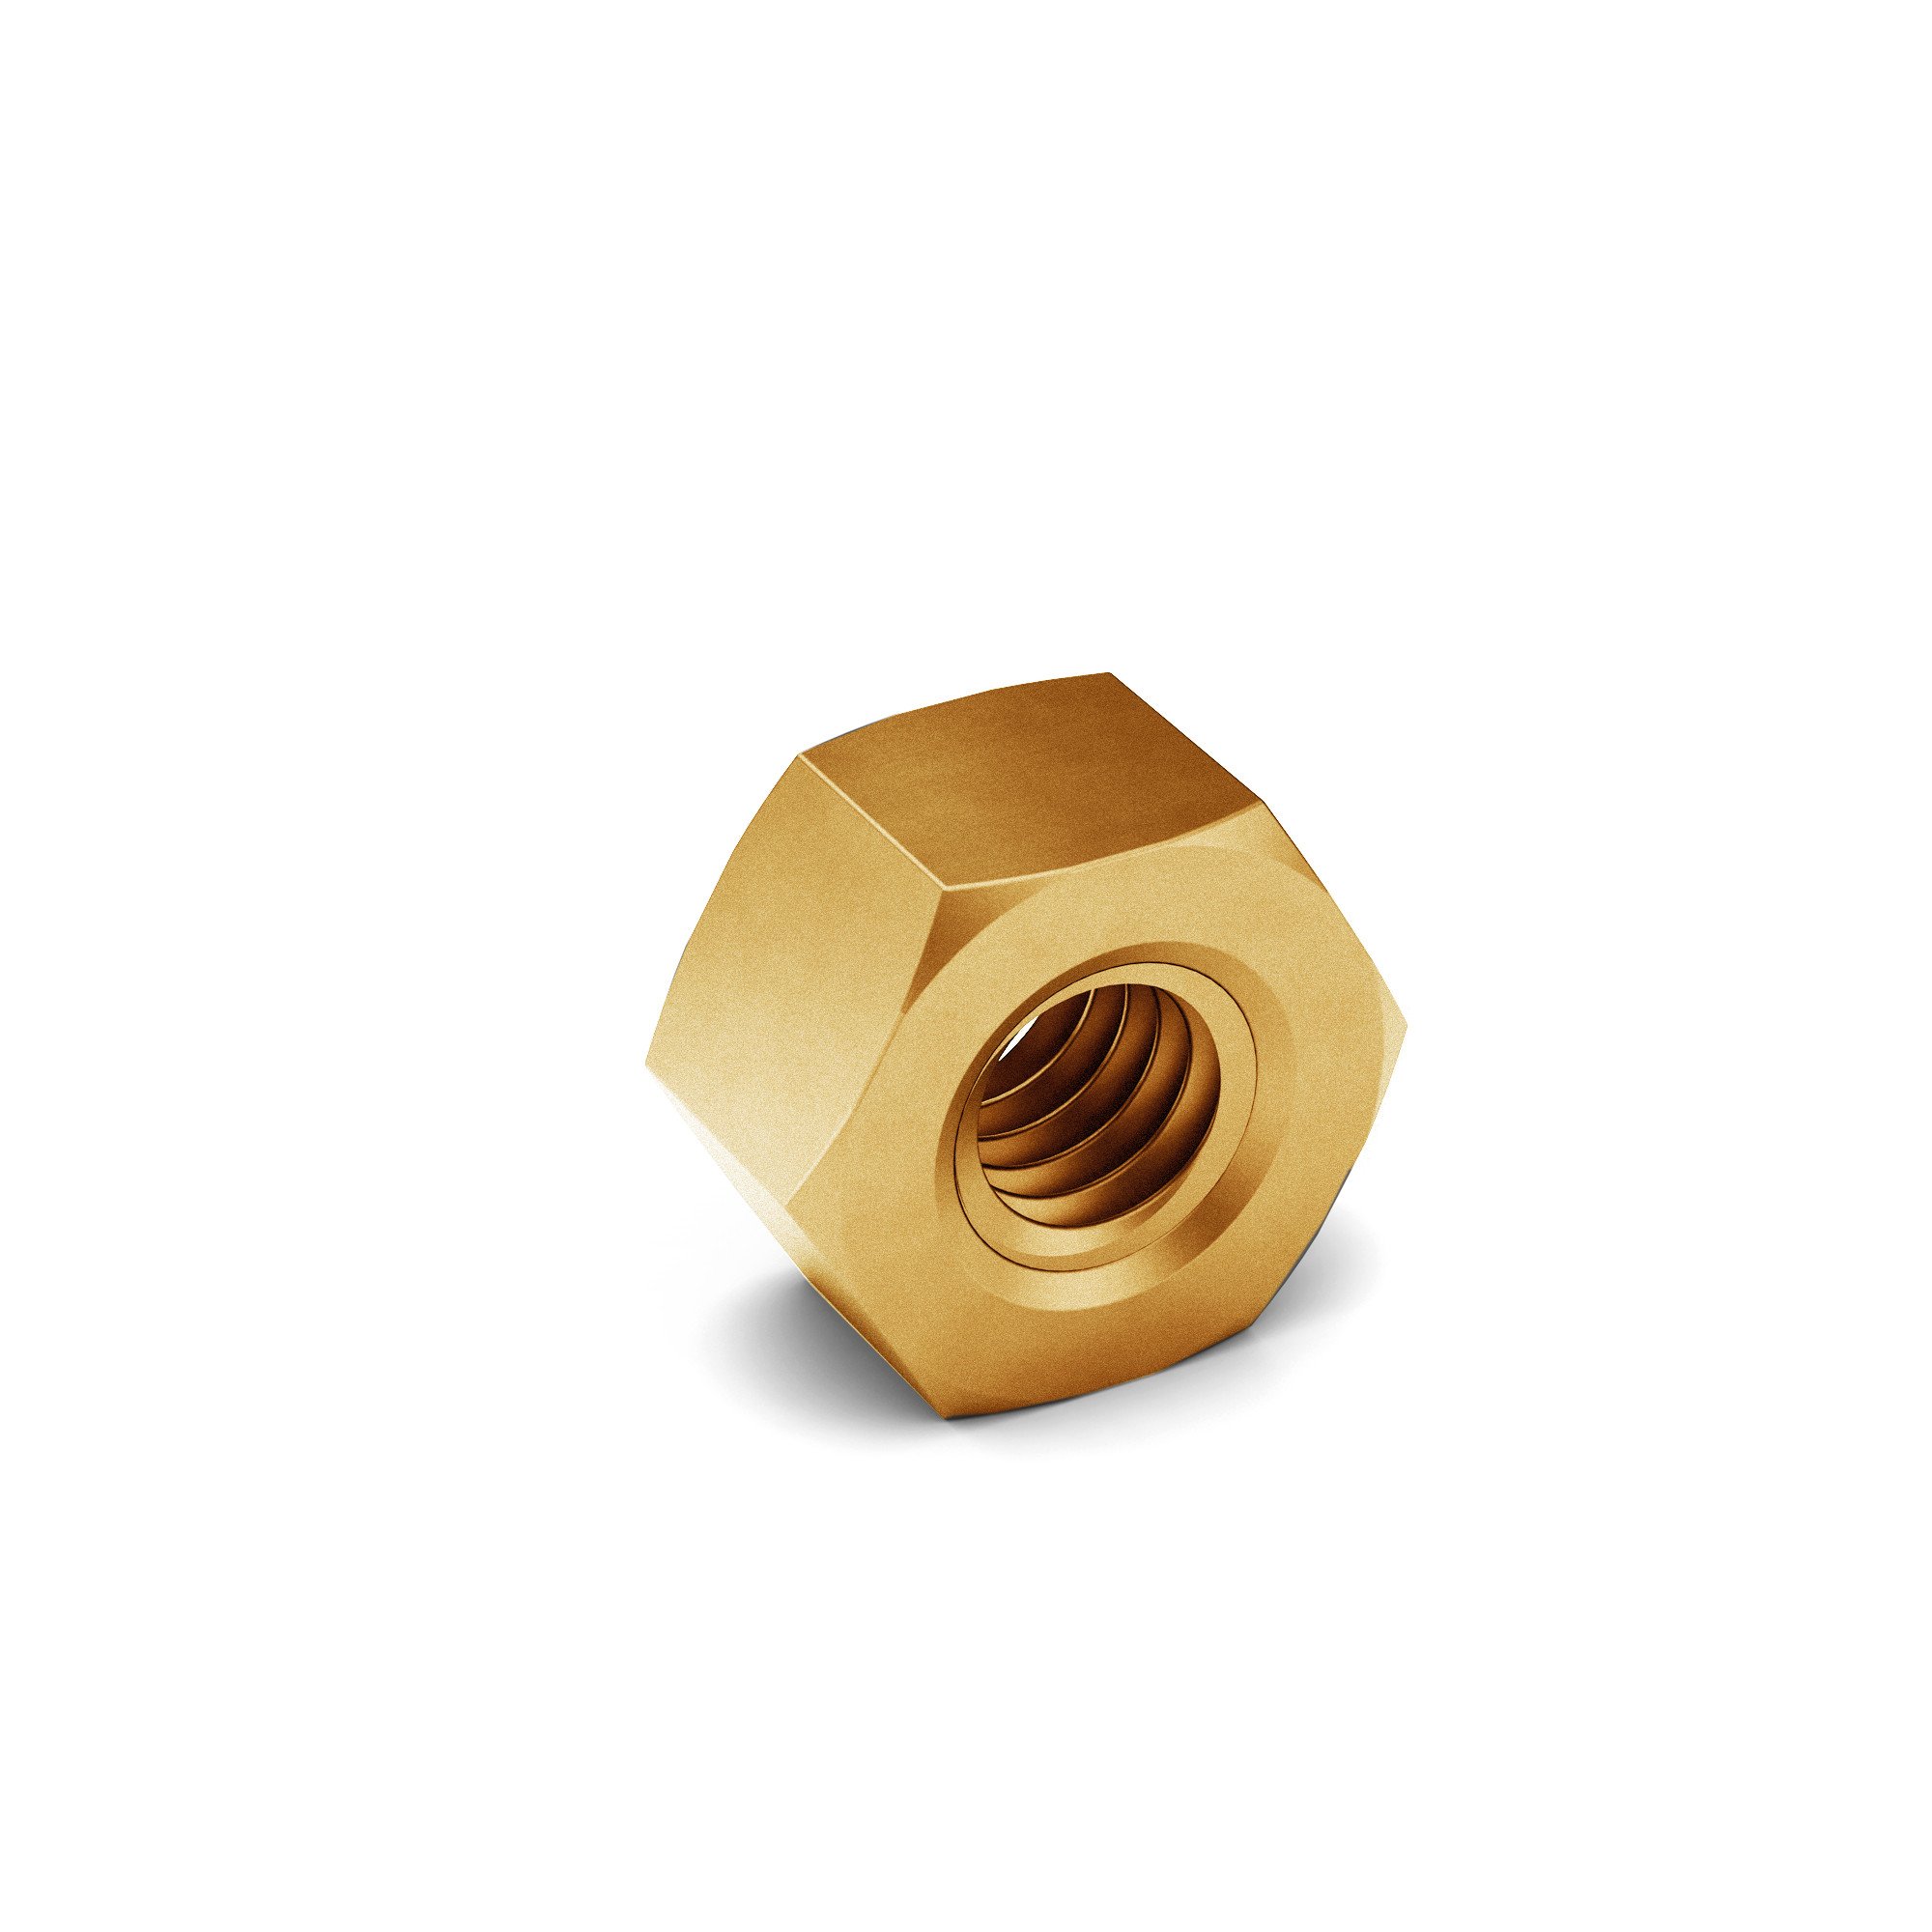 5/16-24 J995 GR 8 Hex Nut Zinc Yellow Made in USA